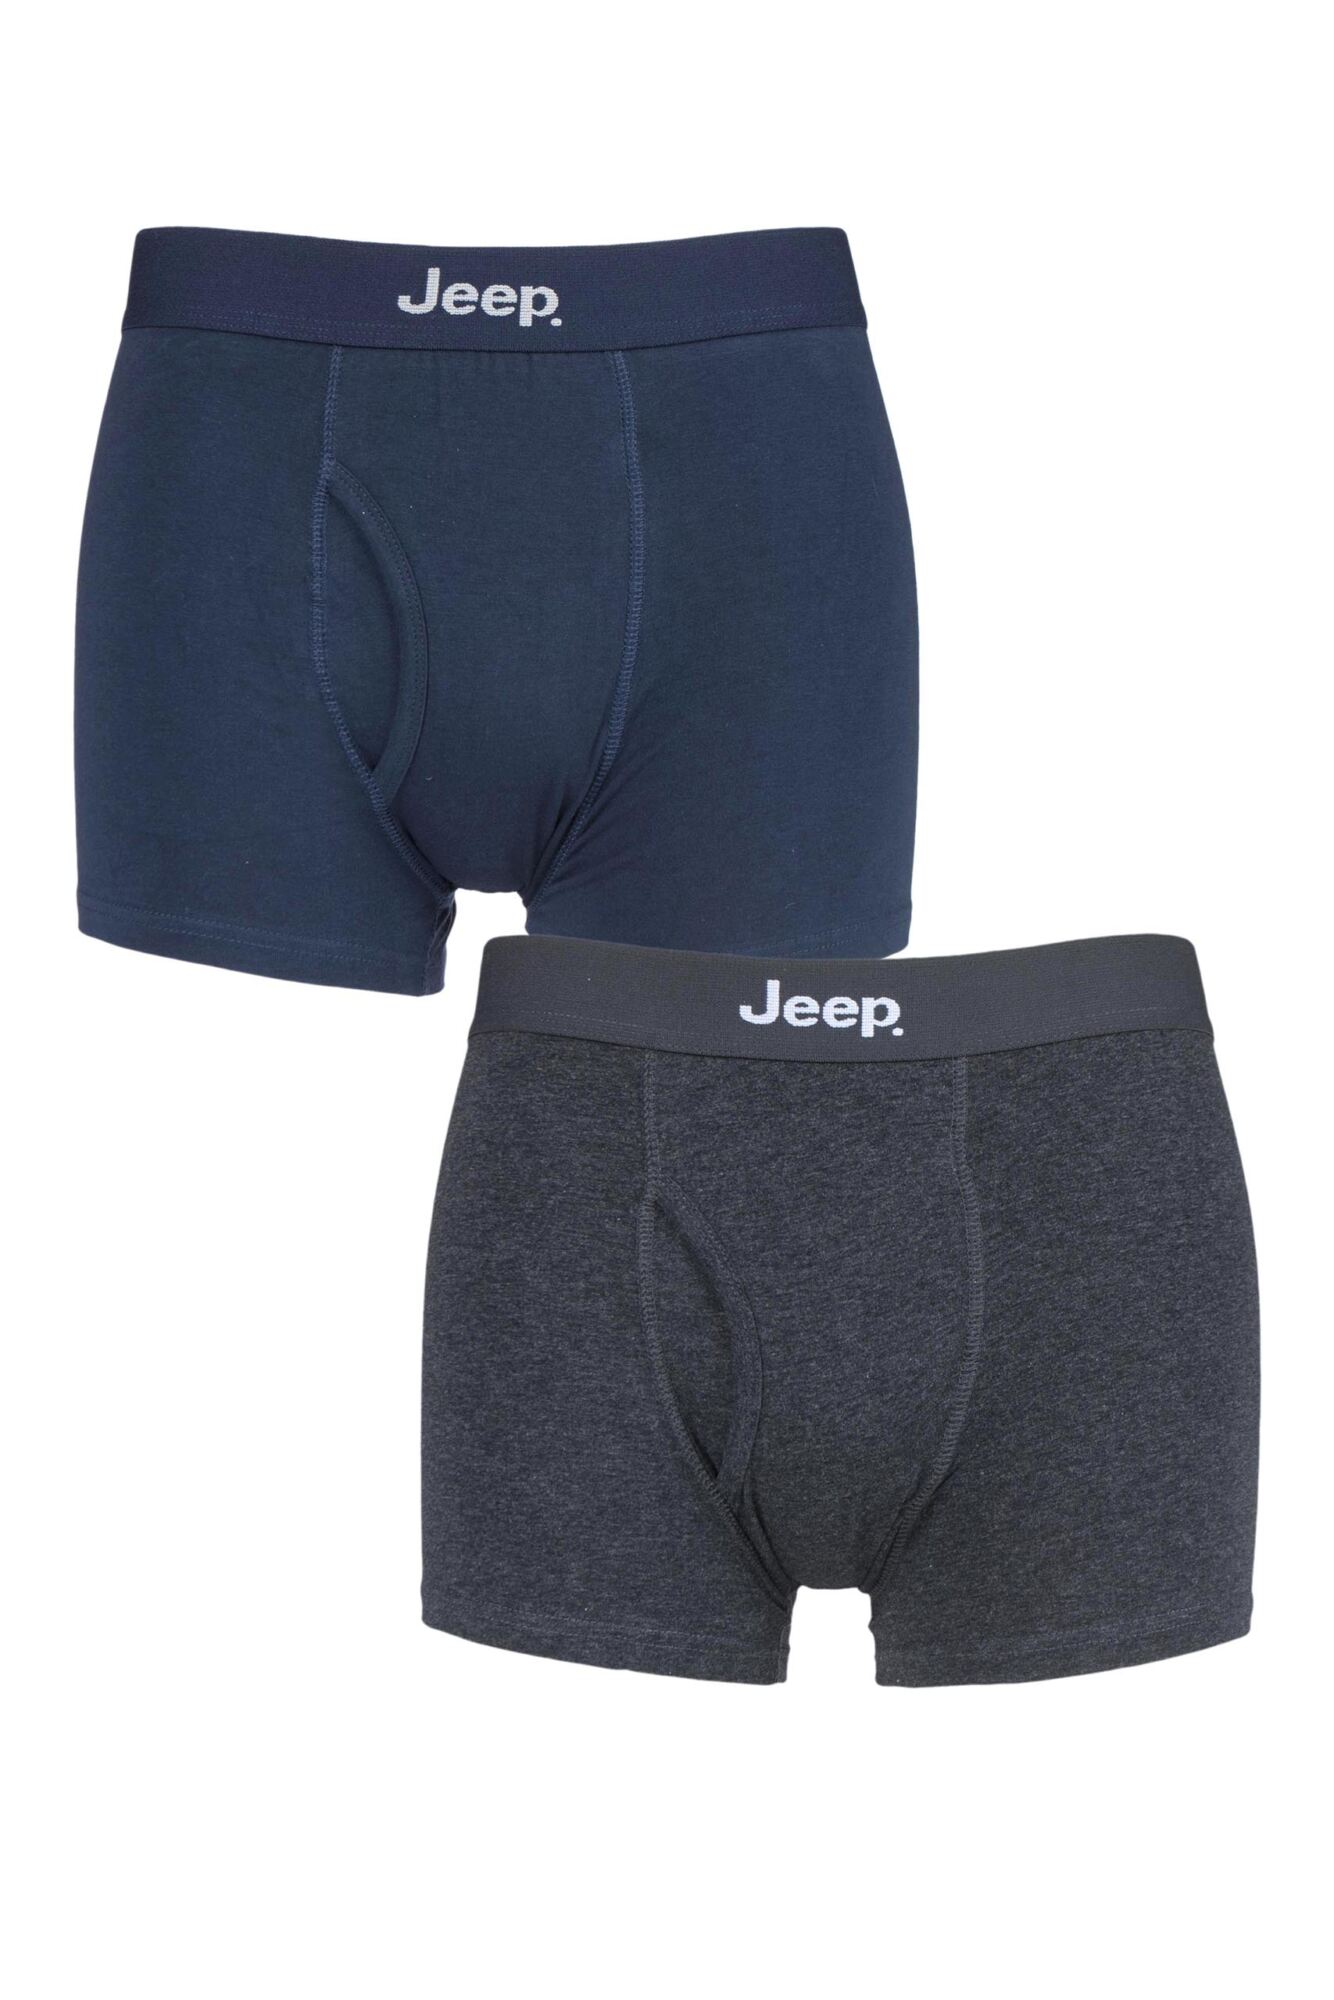 2 Pack Cotton Plain Fitted Key Hole Trunk Boxer Shorts Men's - Jeep